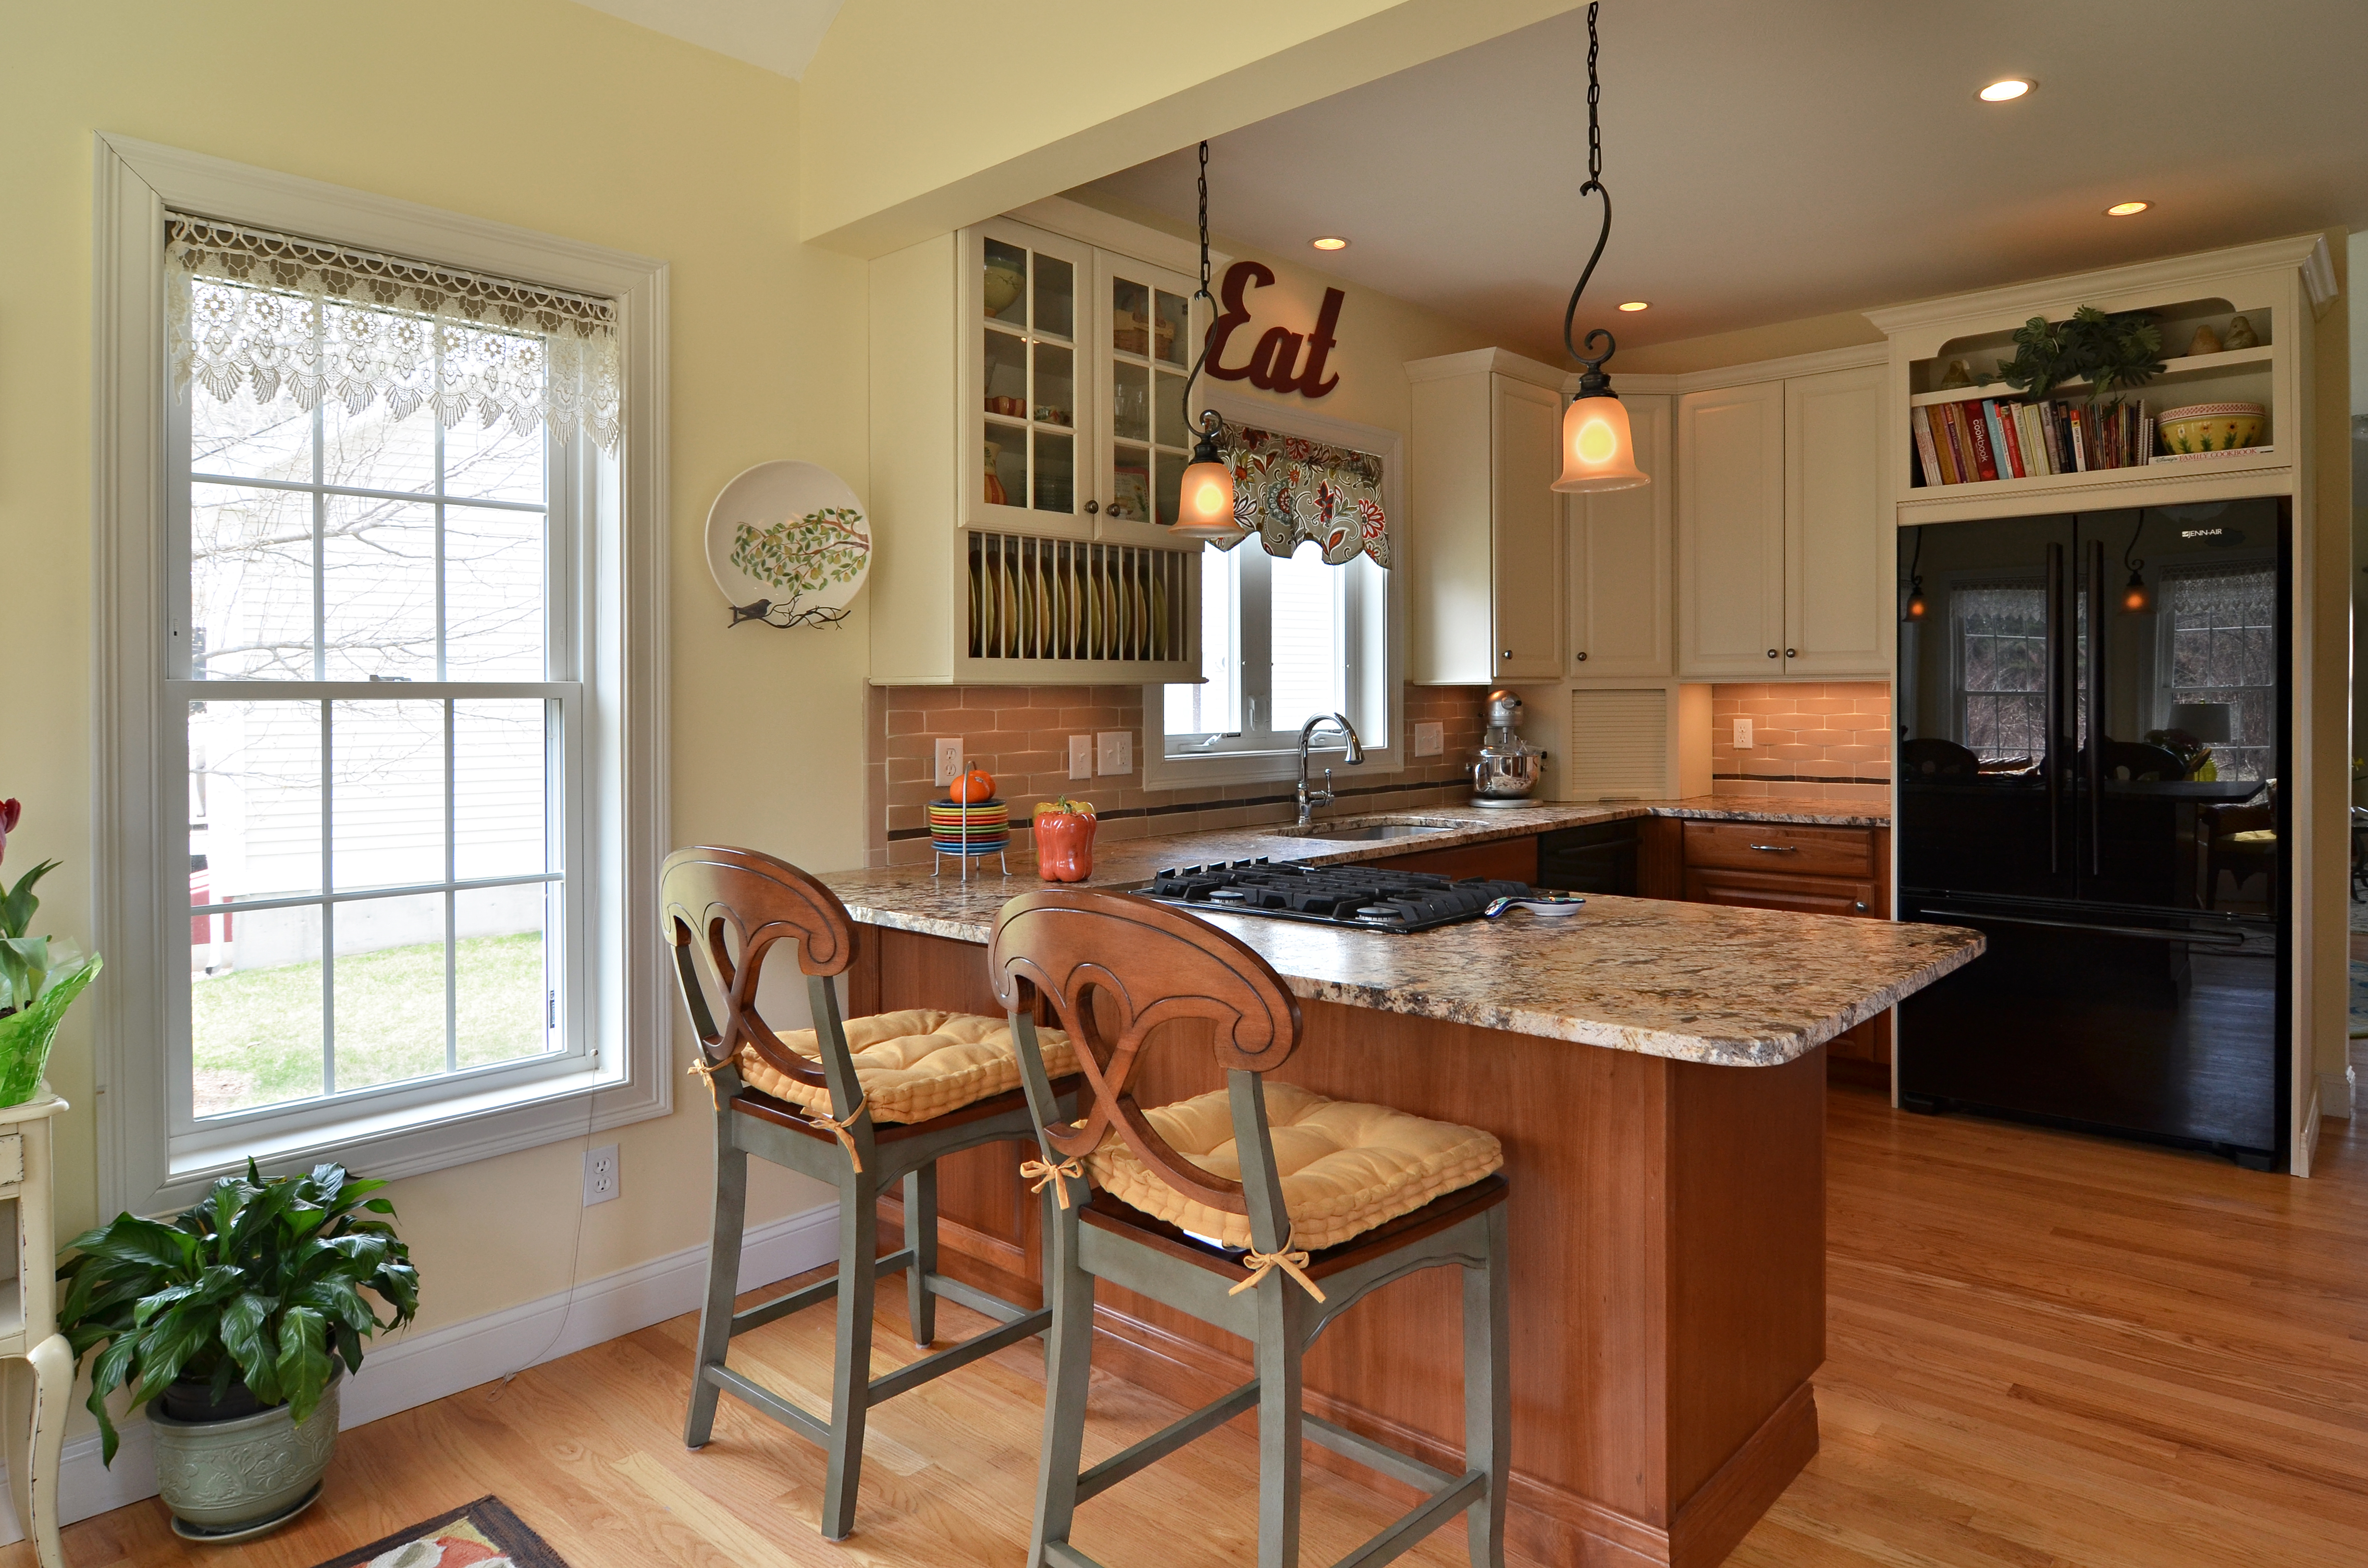 Combine small kitchen and sun room to create a spacious entertaining